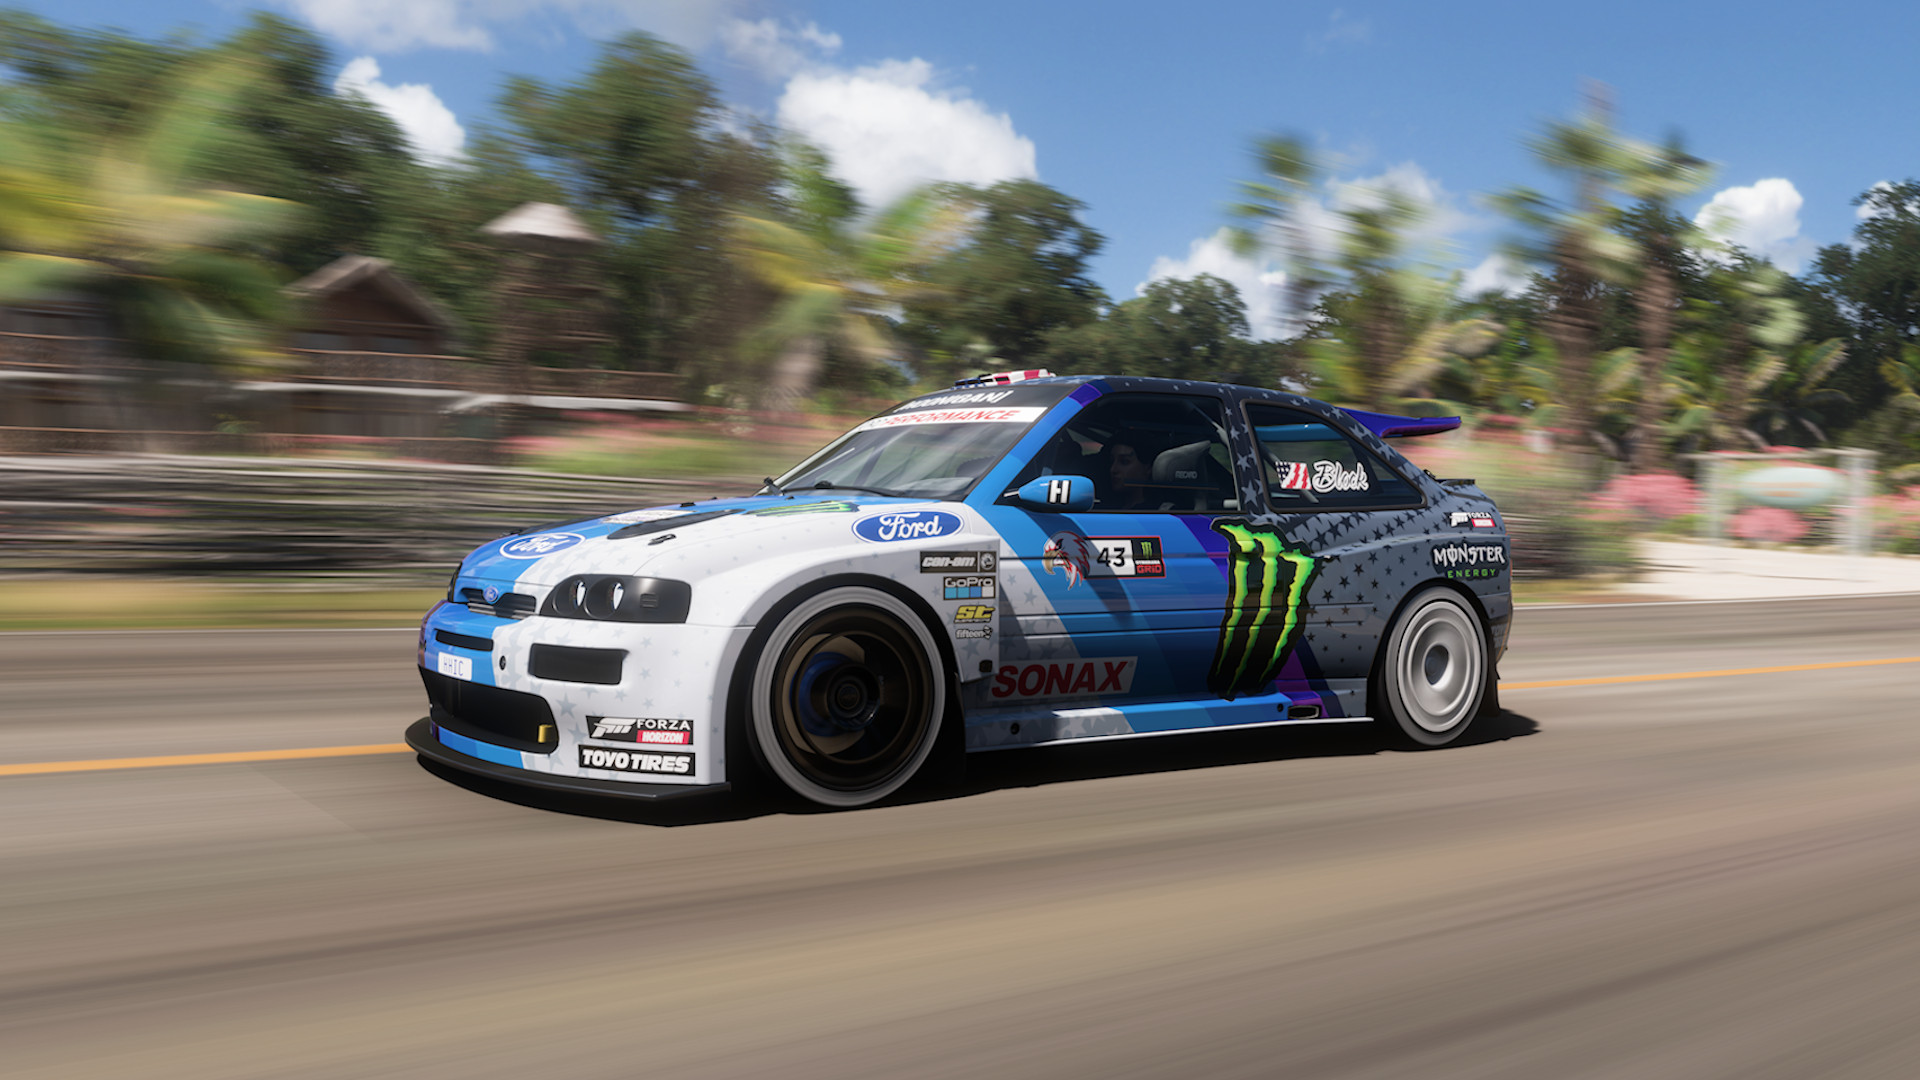 Best racing games: a rally car in Forza Horizon 5